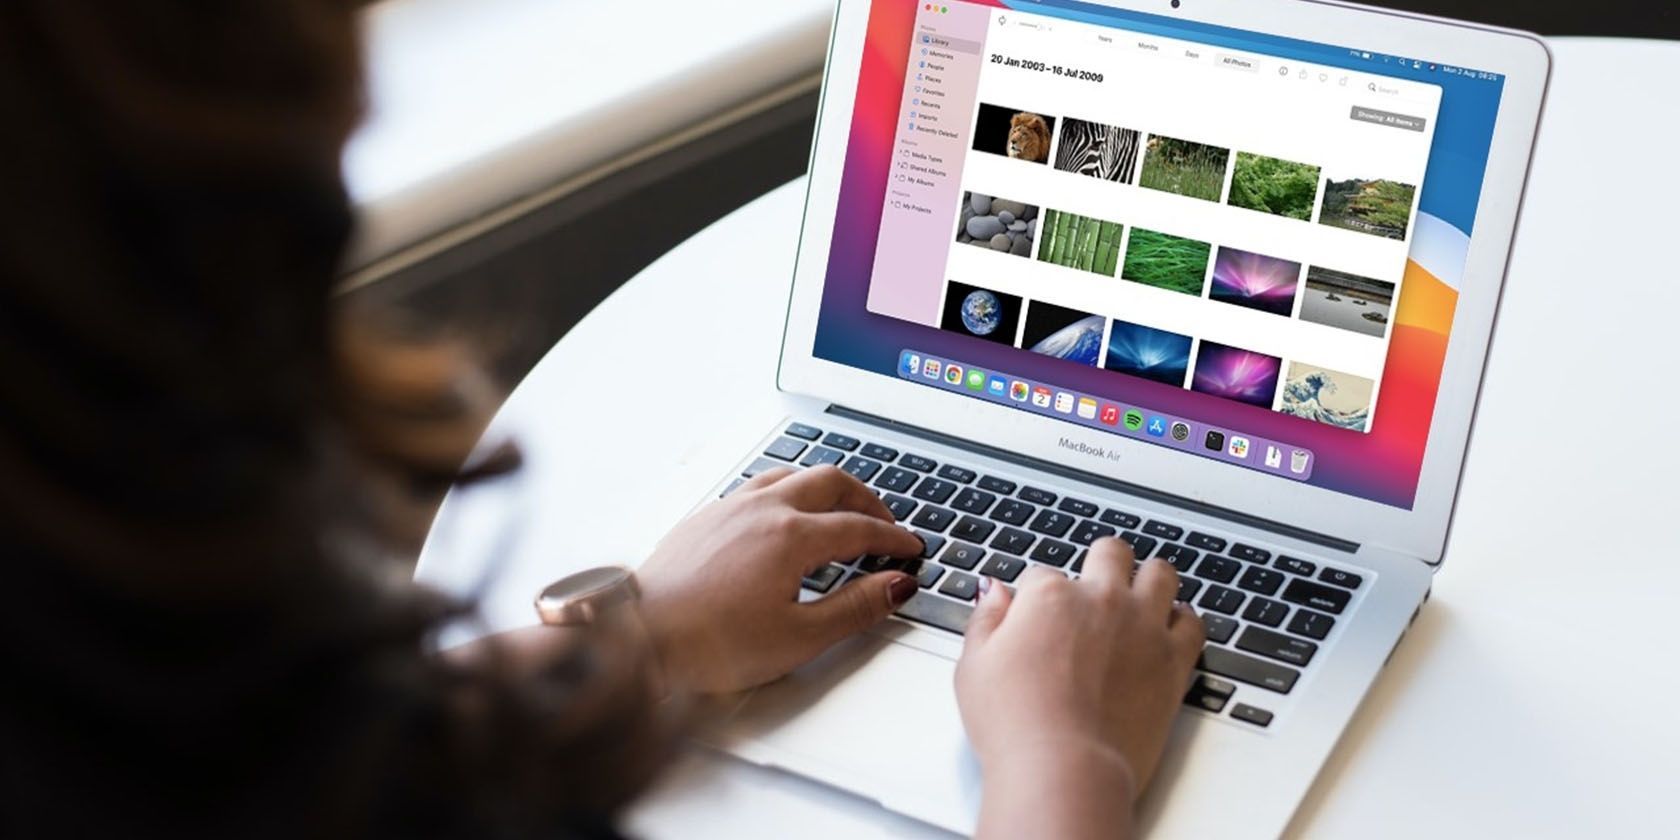 How to Delete Photos on a Mac